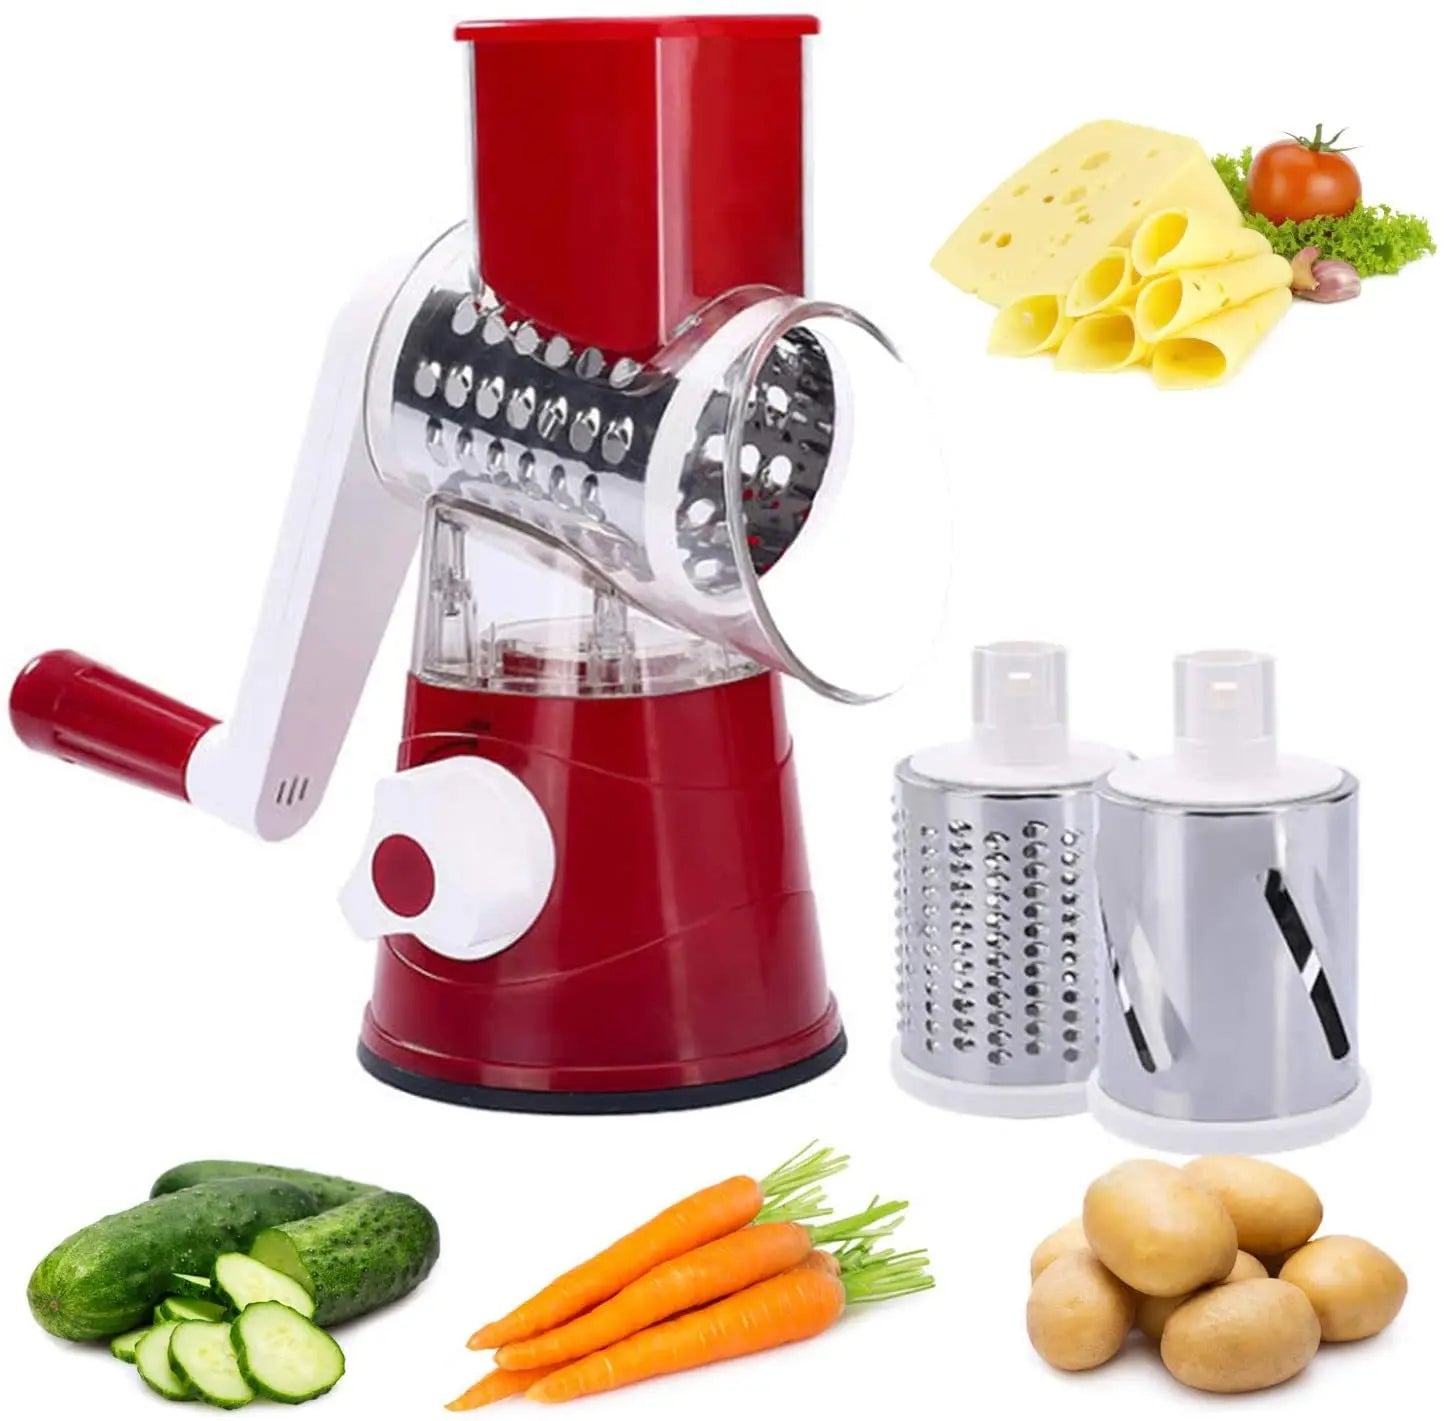 Stainless Steel Hand Crank Vegetable Cutter - Effortlessly Slice and Dice!